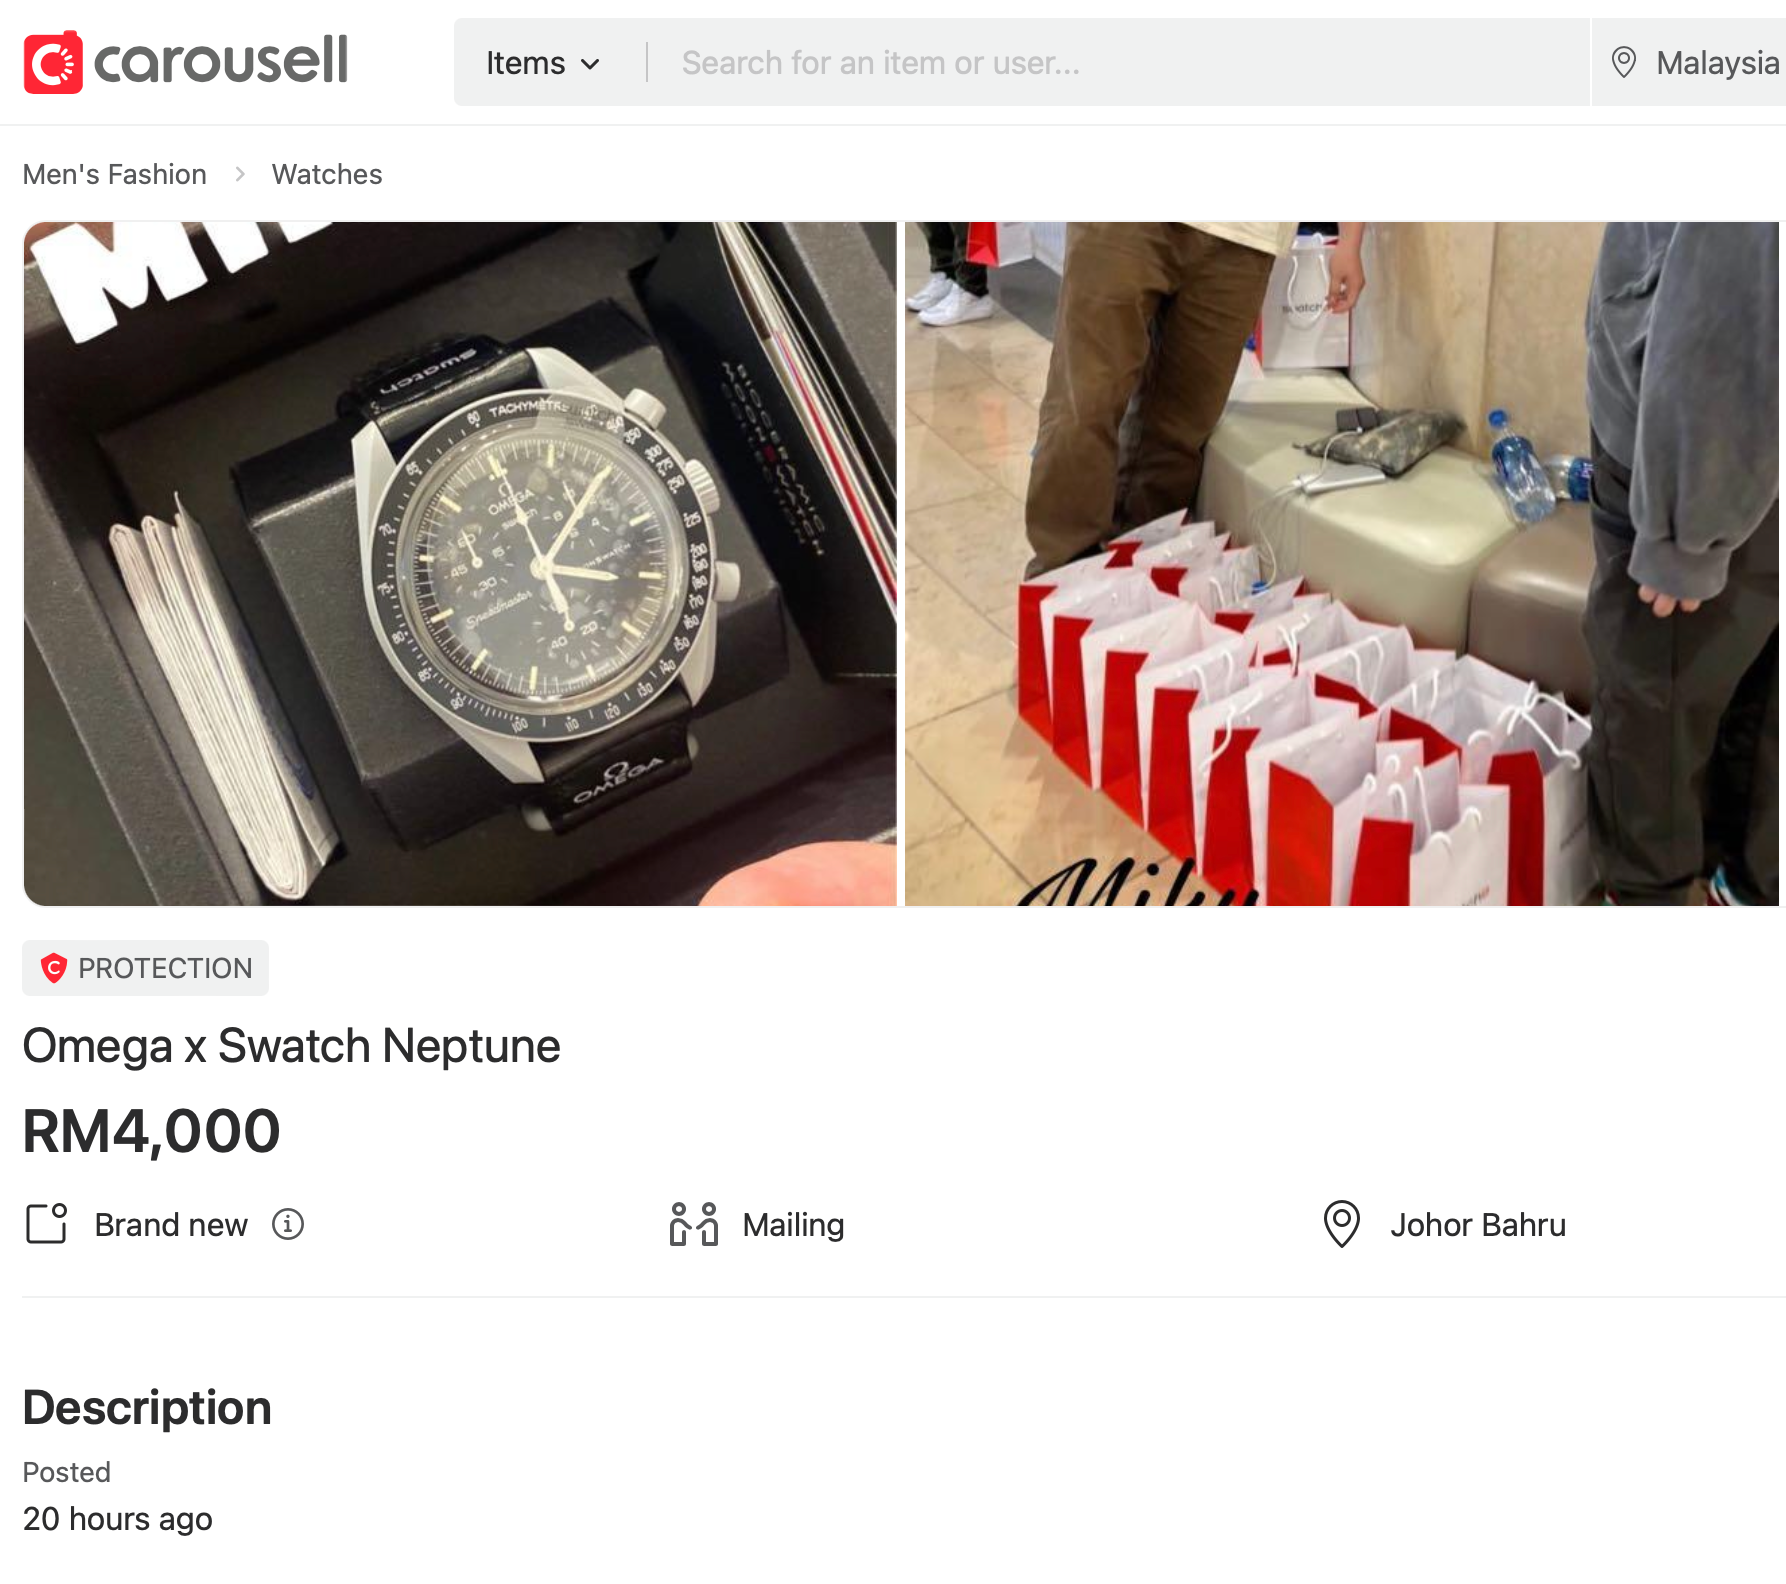 Omega swatch goes on carousell for rm8,000 001